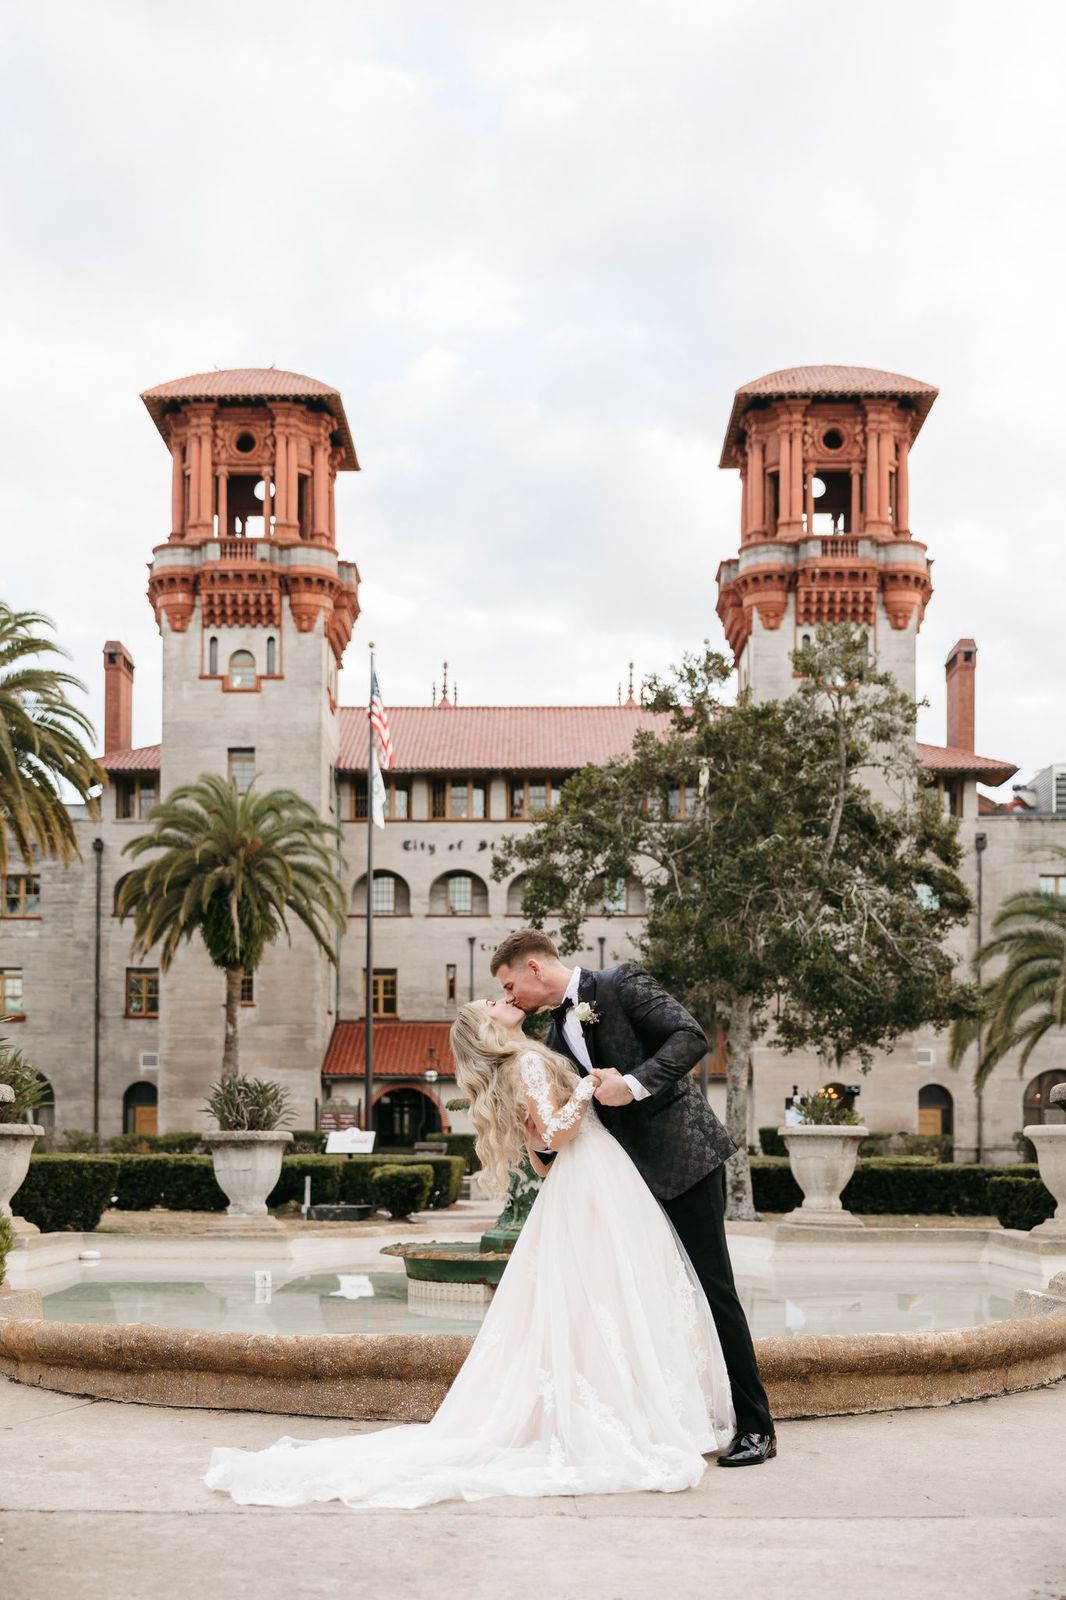 Bride and groom kissing near the fountain in front of the Lightner Museum in St. Augustine.